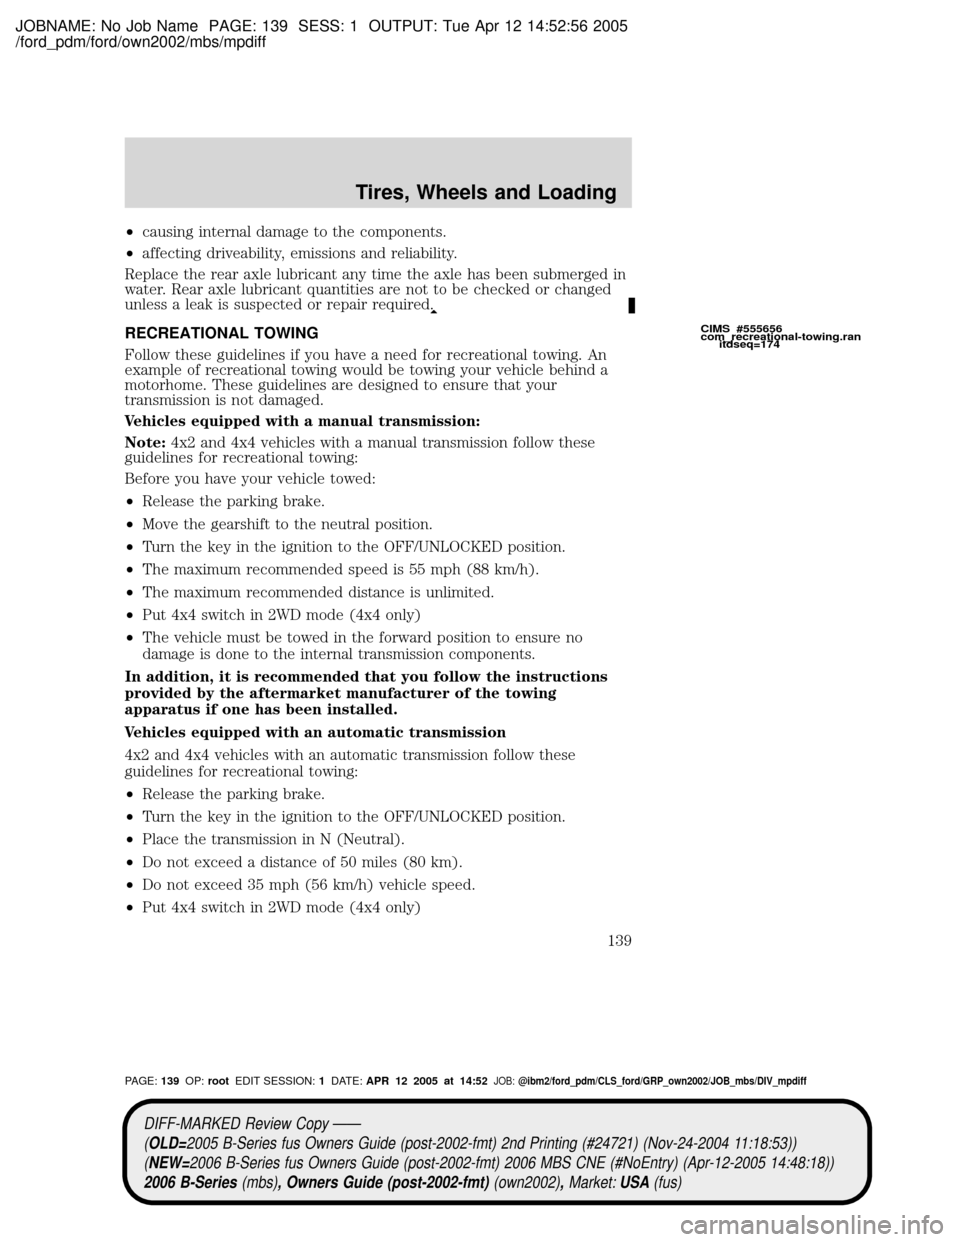 MAZDA MODEL B2300 TRUCK 2006  Owners Manual (in English) JOBNAME: No Job Name PAGE: 139 SESS: 1 OUTPUT: Tue Apr 12 14:52:56 2005
/ford_pdm/ford/own2002/mbs/mpdiff
²causing internal damage to the components.
²affecting driveability, emissions and reliabili